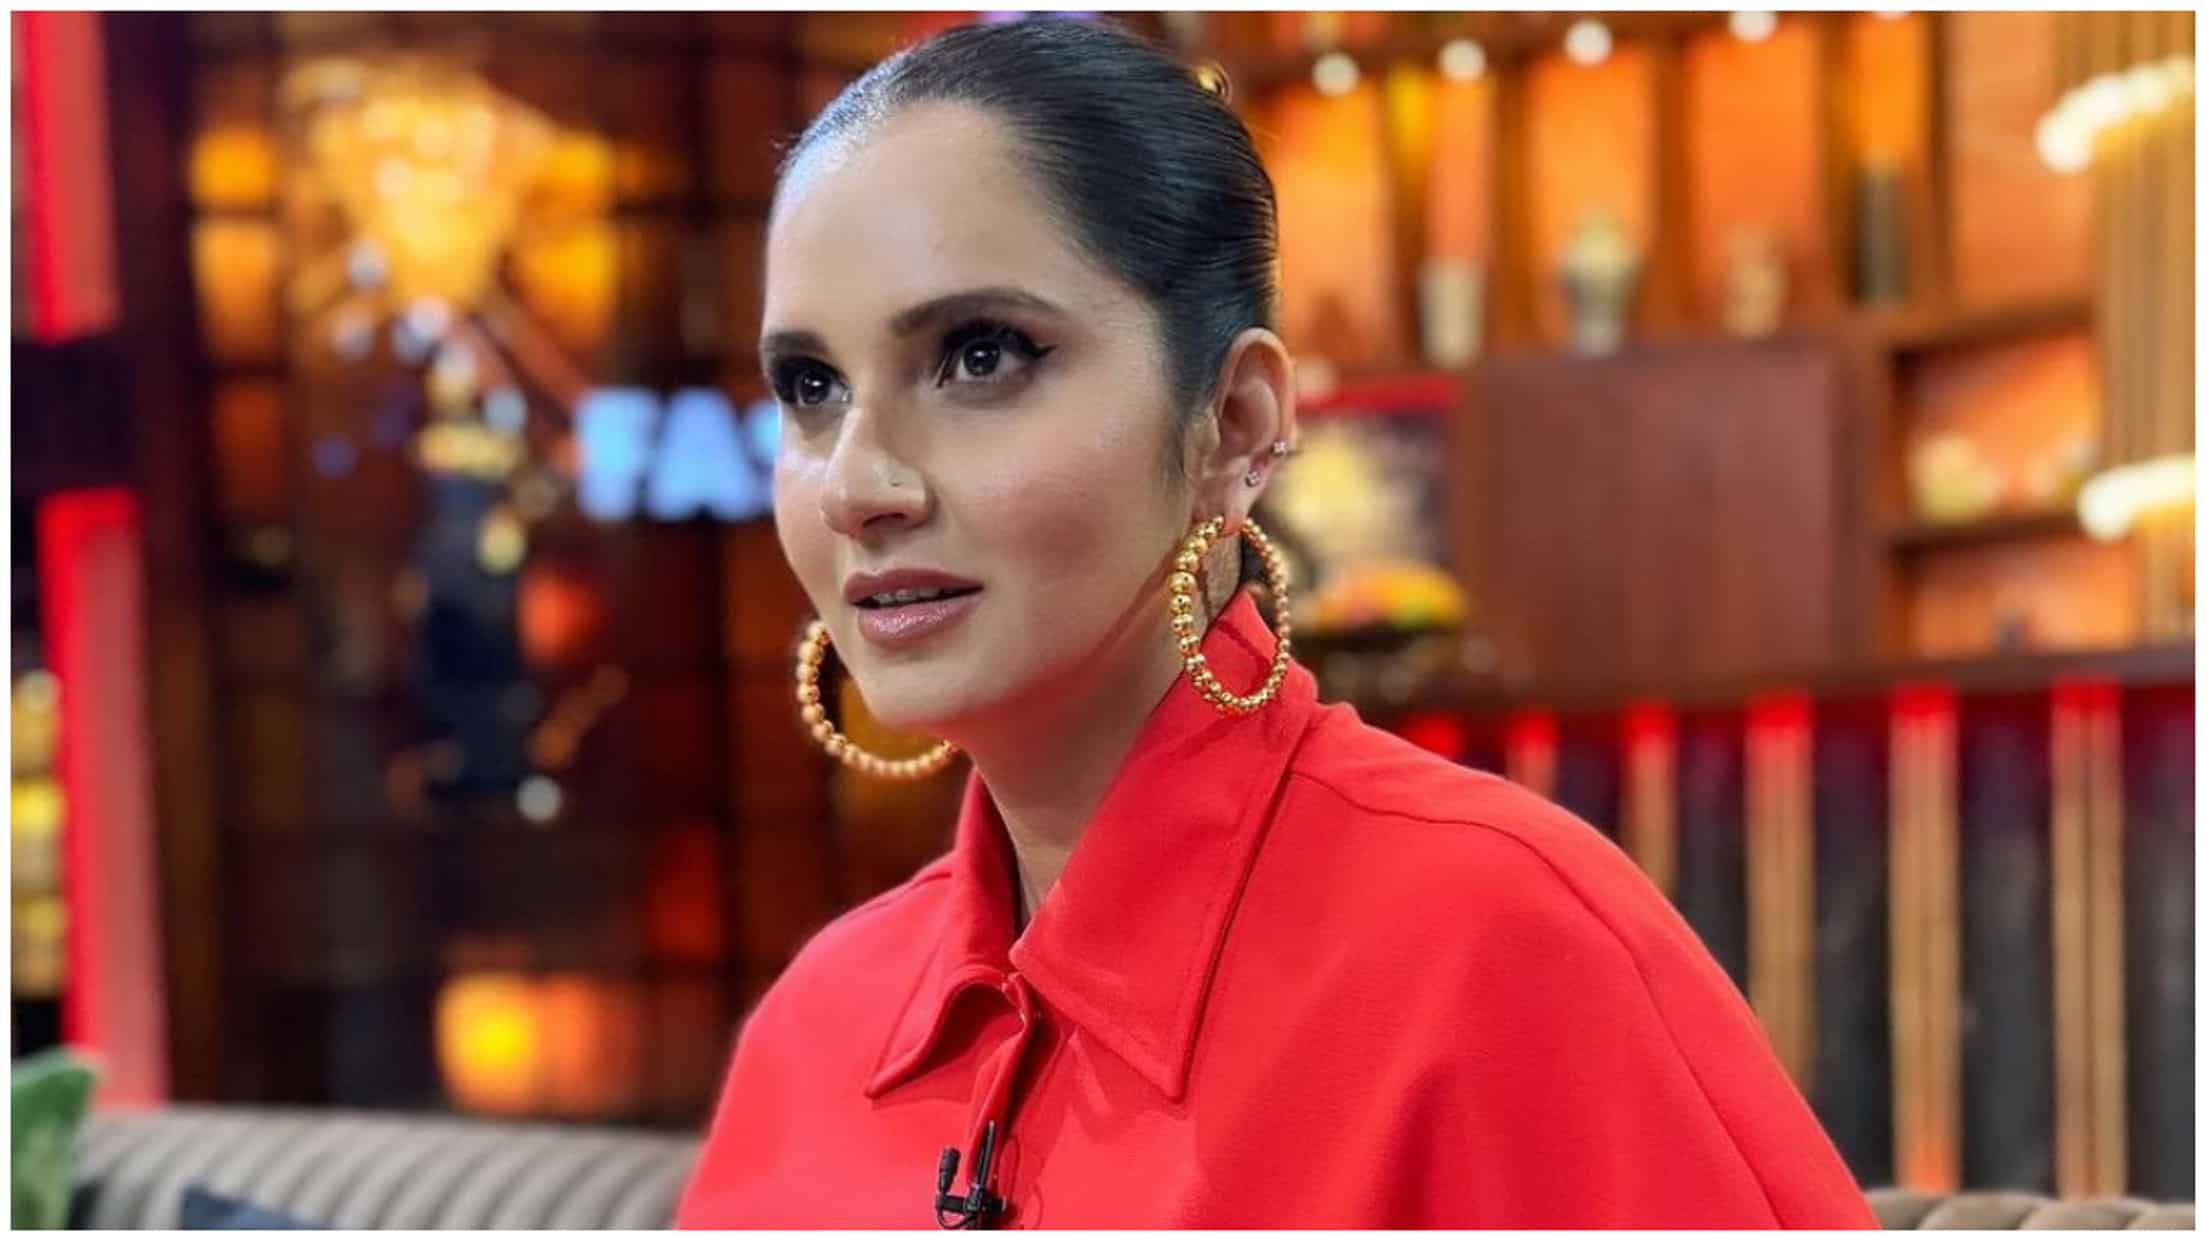 https://www.mobilemasala.com/film-gossip/Did-Sania-Mirza-accidentally-confirm-her-presence-on-The-Great-Indian-Kapil-Show-Heres-the-latest-buzz-i255122